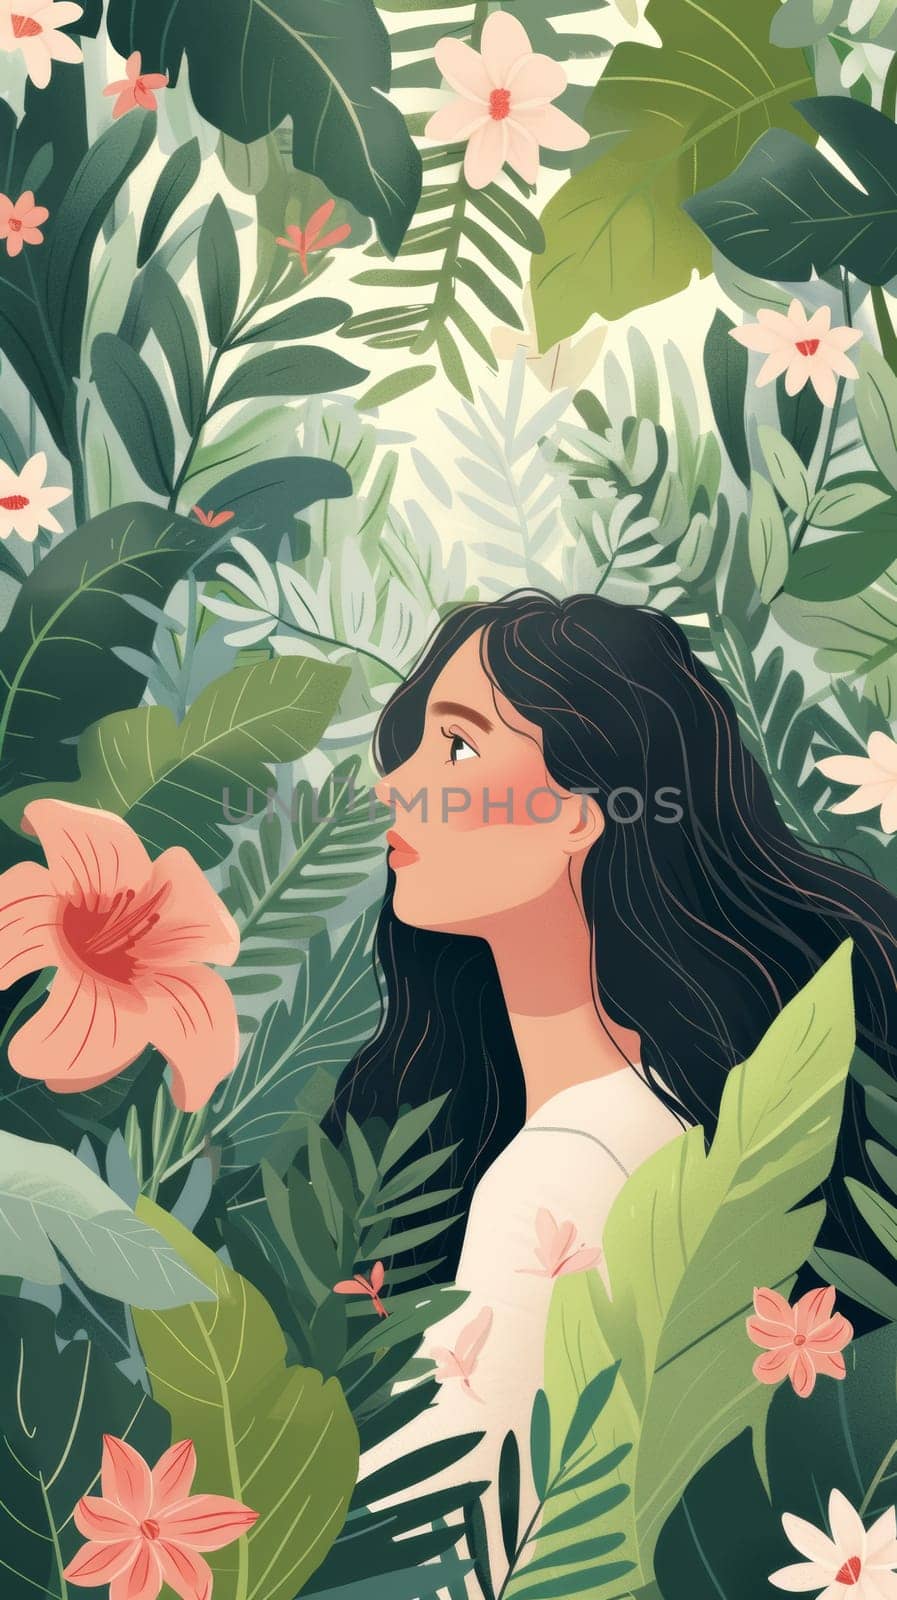 A woman in a tropical forest surrounded by flowers and leaves